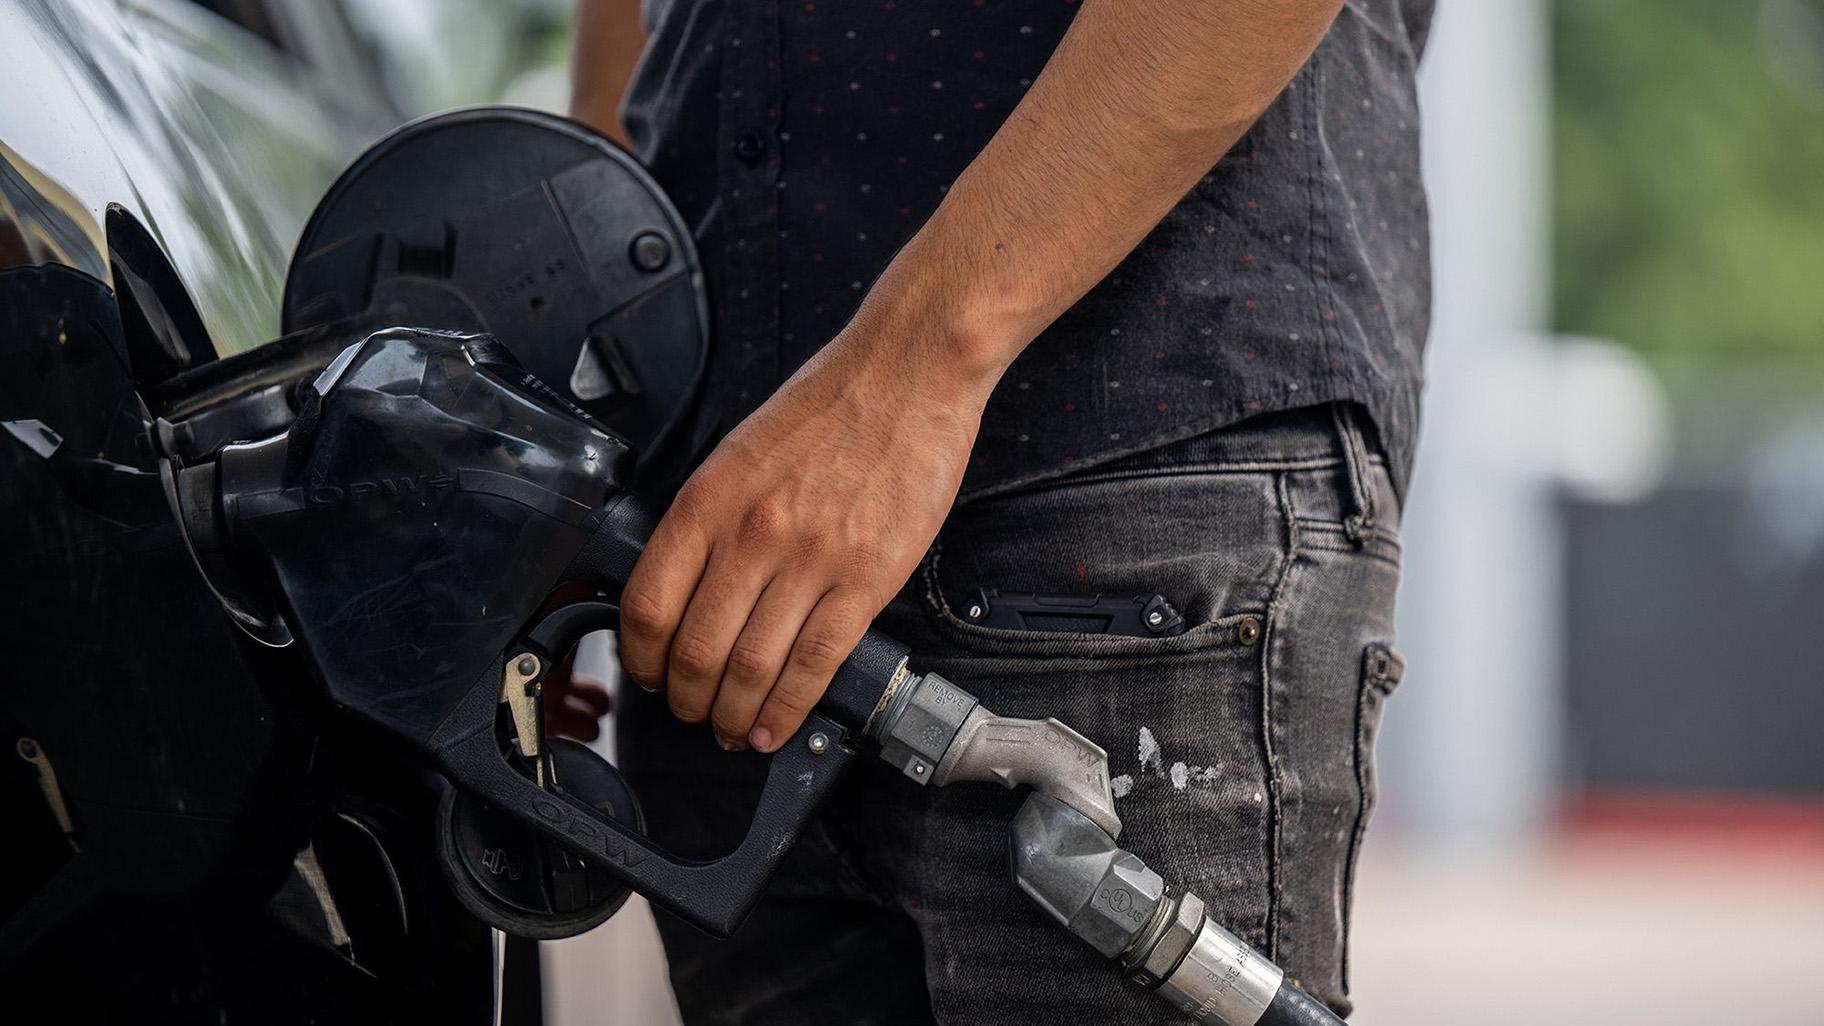 A person pumps gas at a Chevron gas station on May 26 in Austin, Texas. (Brandon Bell / Getty Images via CNN)